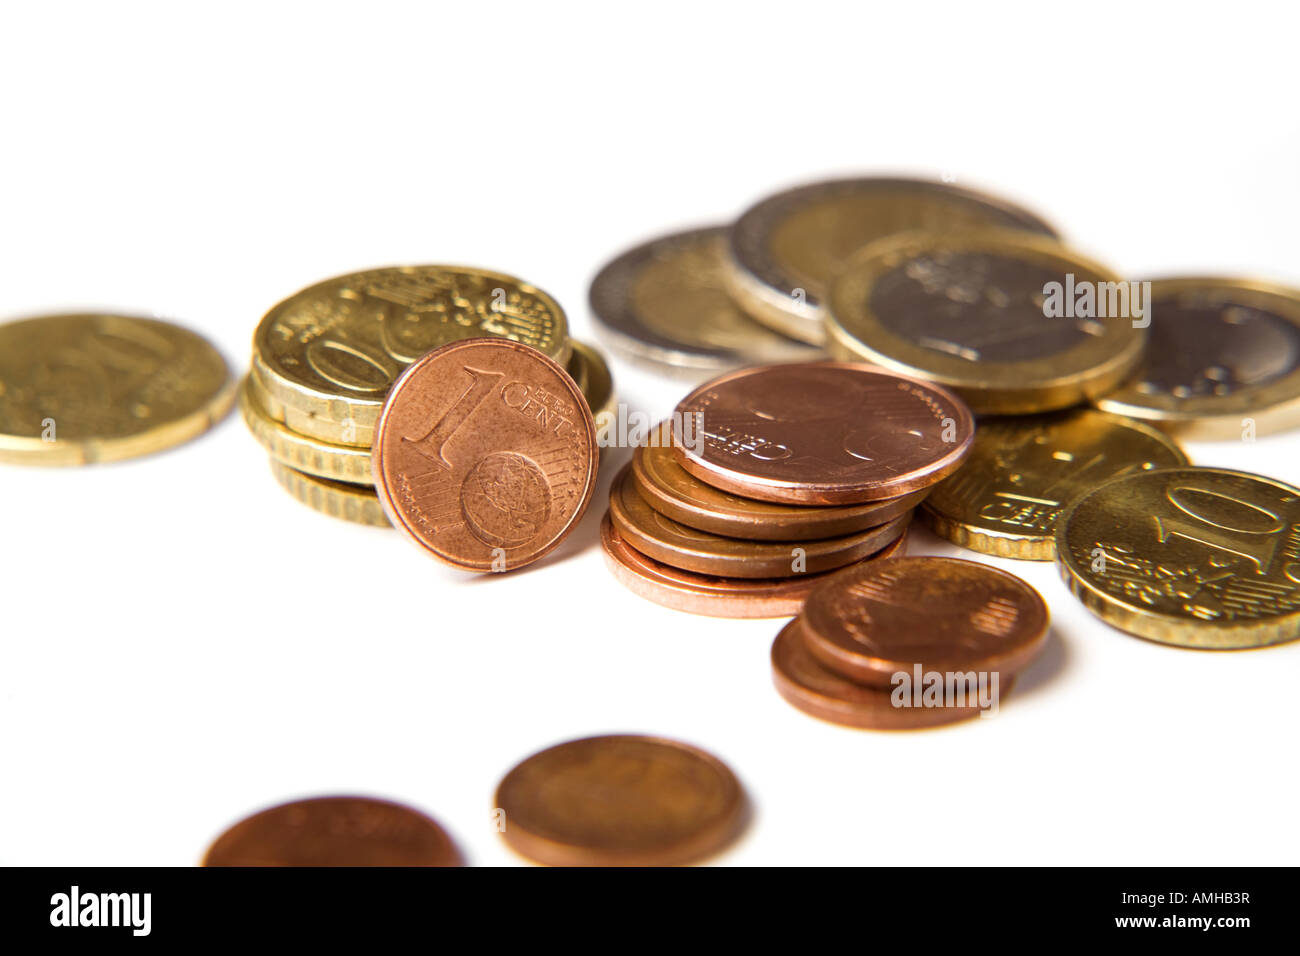 close-up of various european currency coins on white background Stock Photo